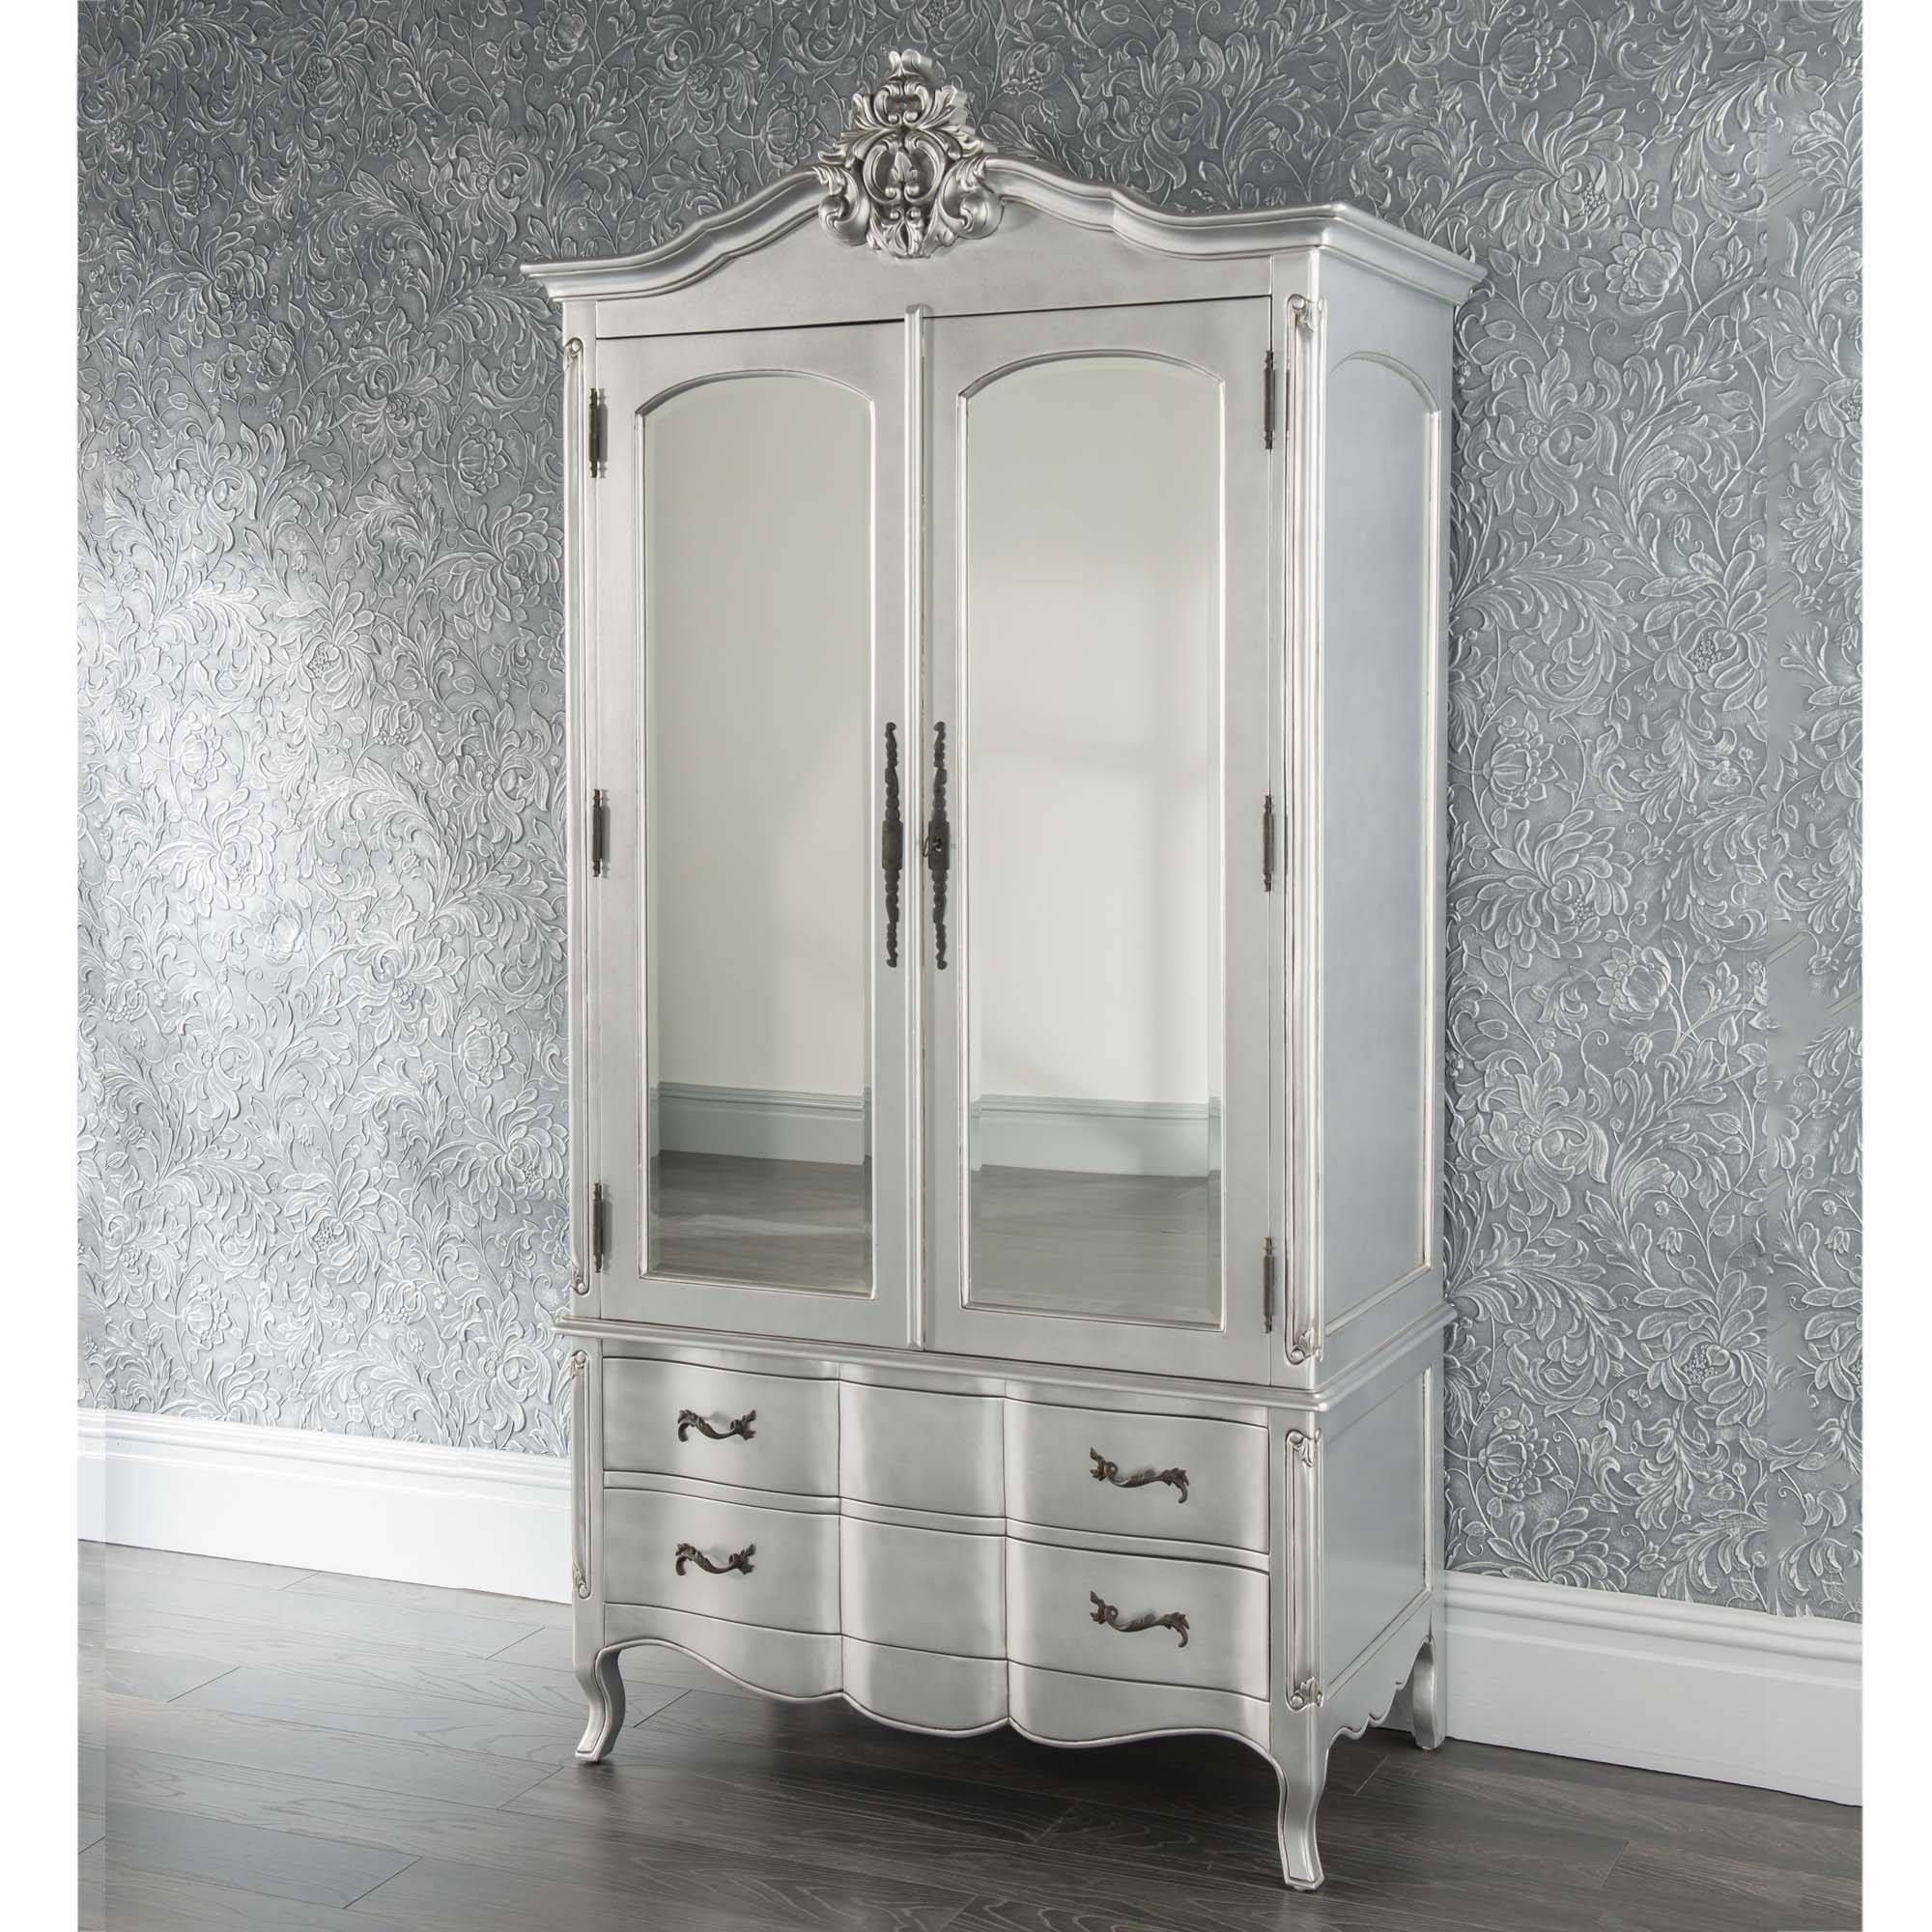 Estelle Antique French Style Wardrobe | Shabby Chic With Black French Style Wardrobes (View 9 of 15)